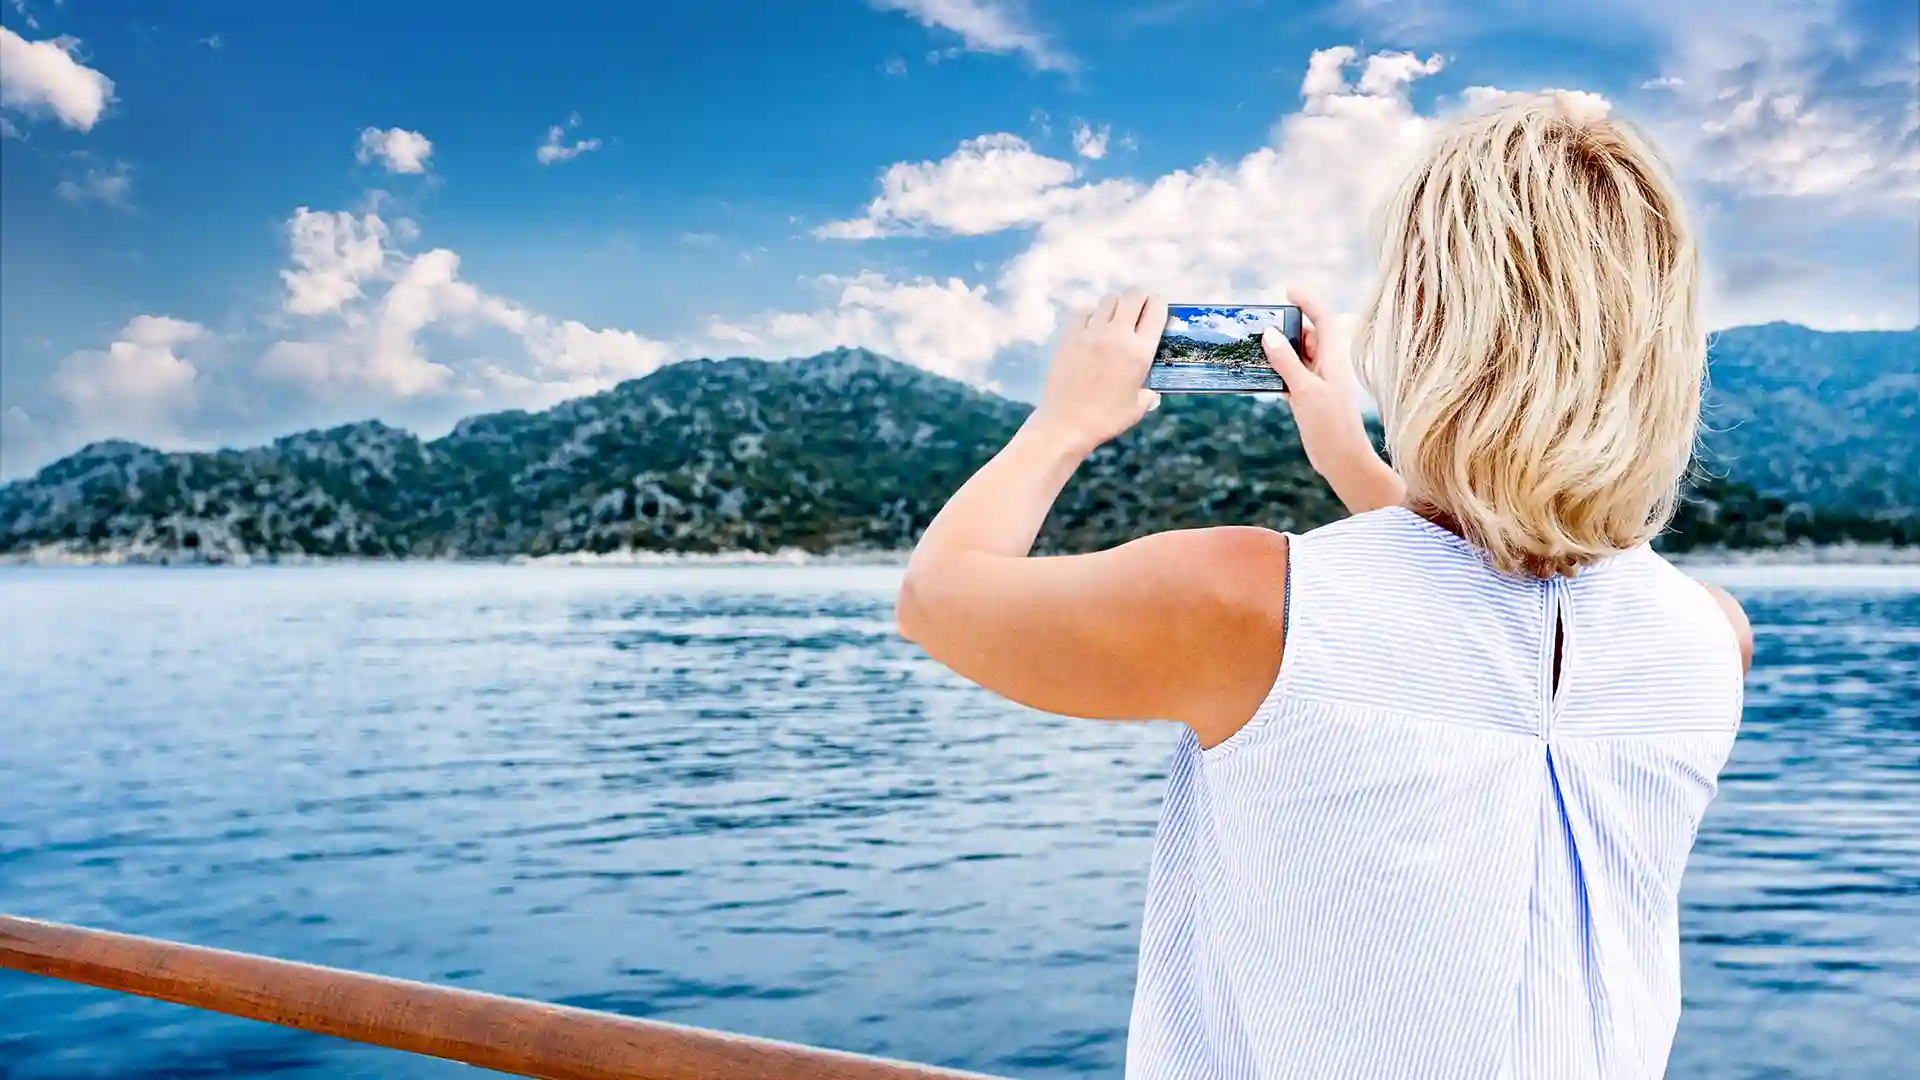 International Travel Tips for Your Next Cruise